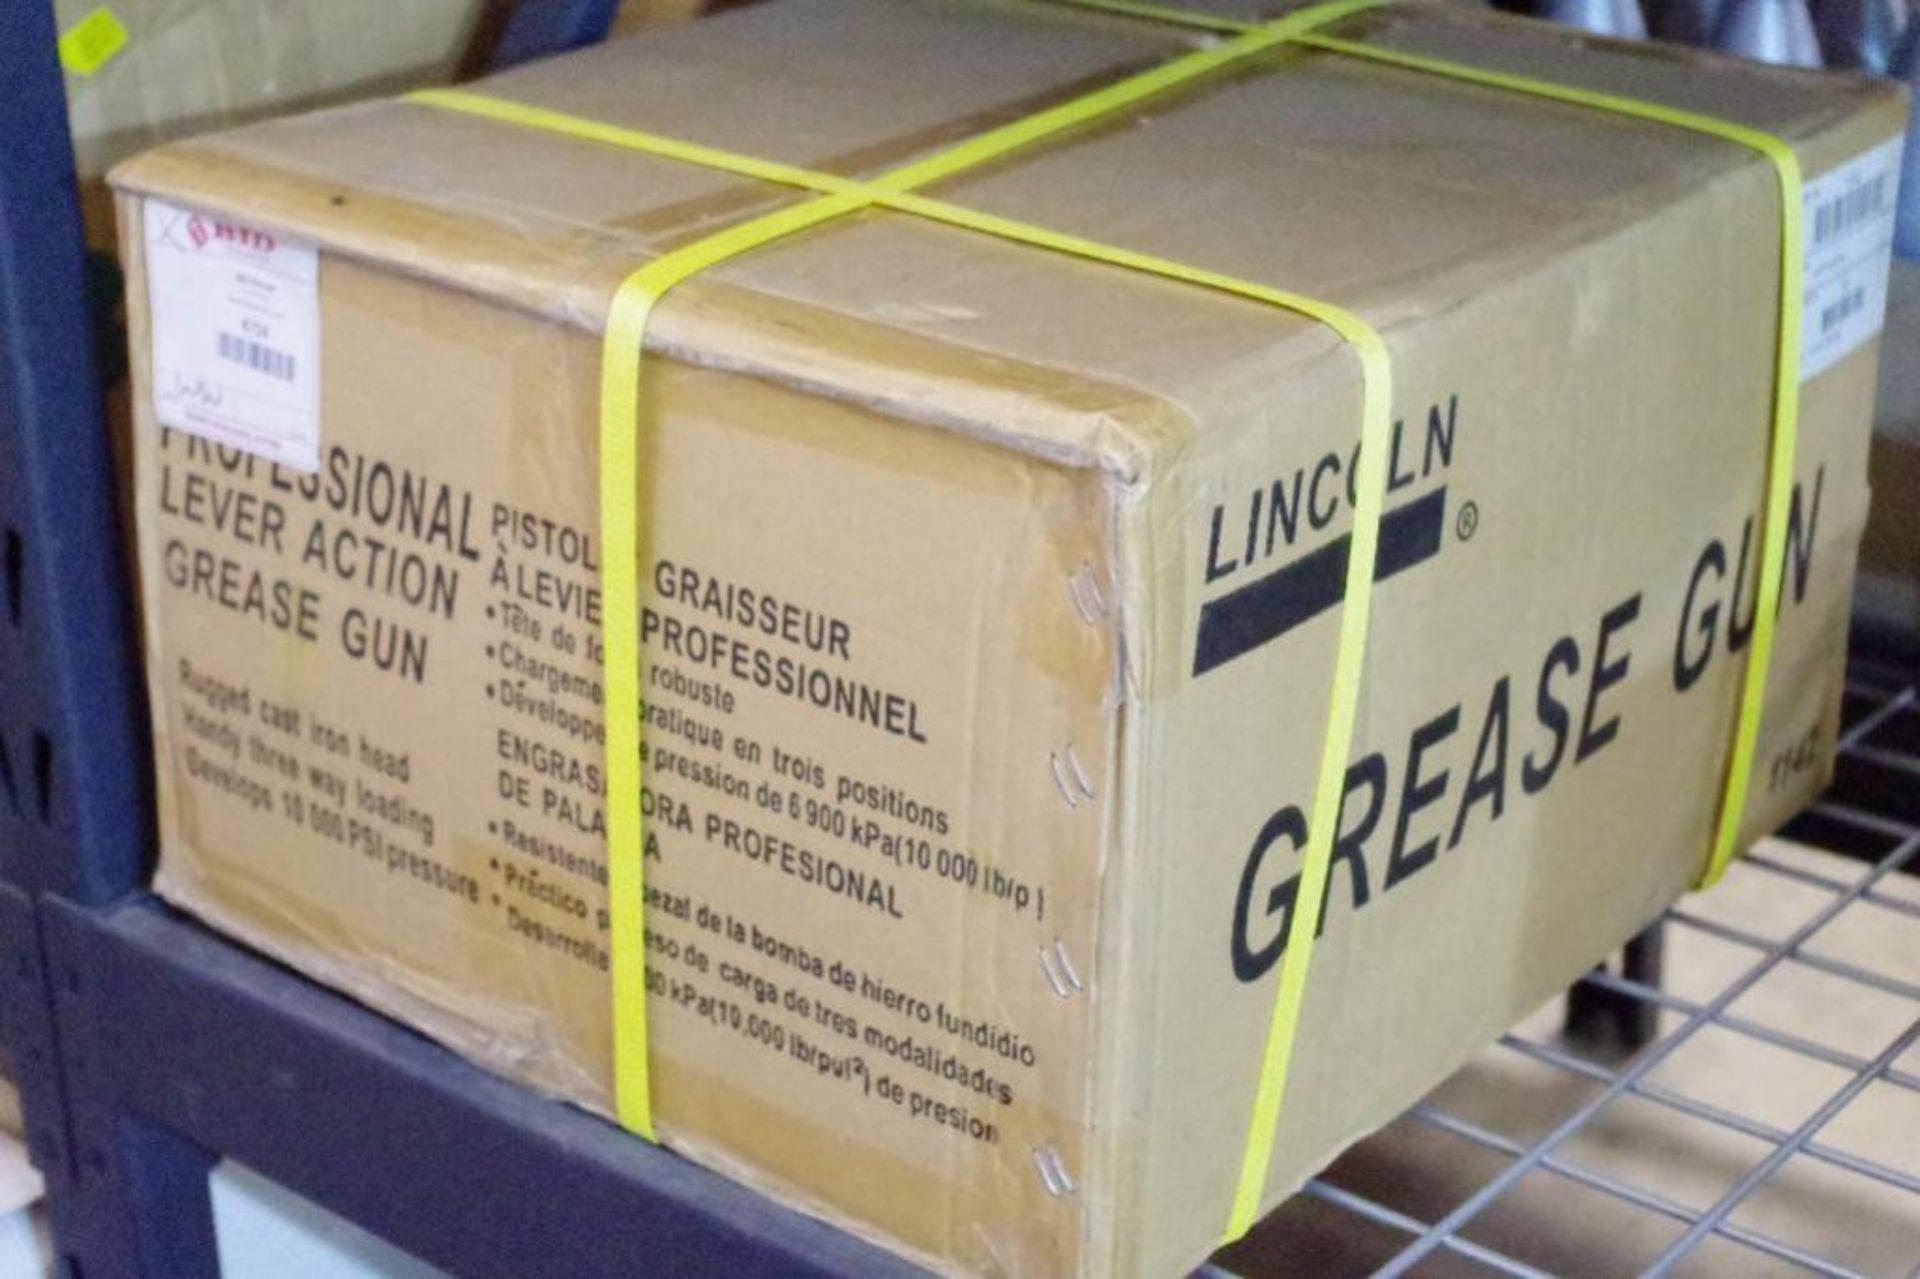 [12] NEW LINCOLN Professional Lever Action Grease Guns (1 Box of 12 Each) - Image 3 of 4